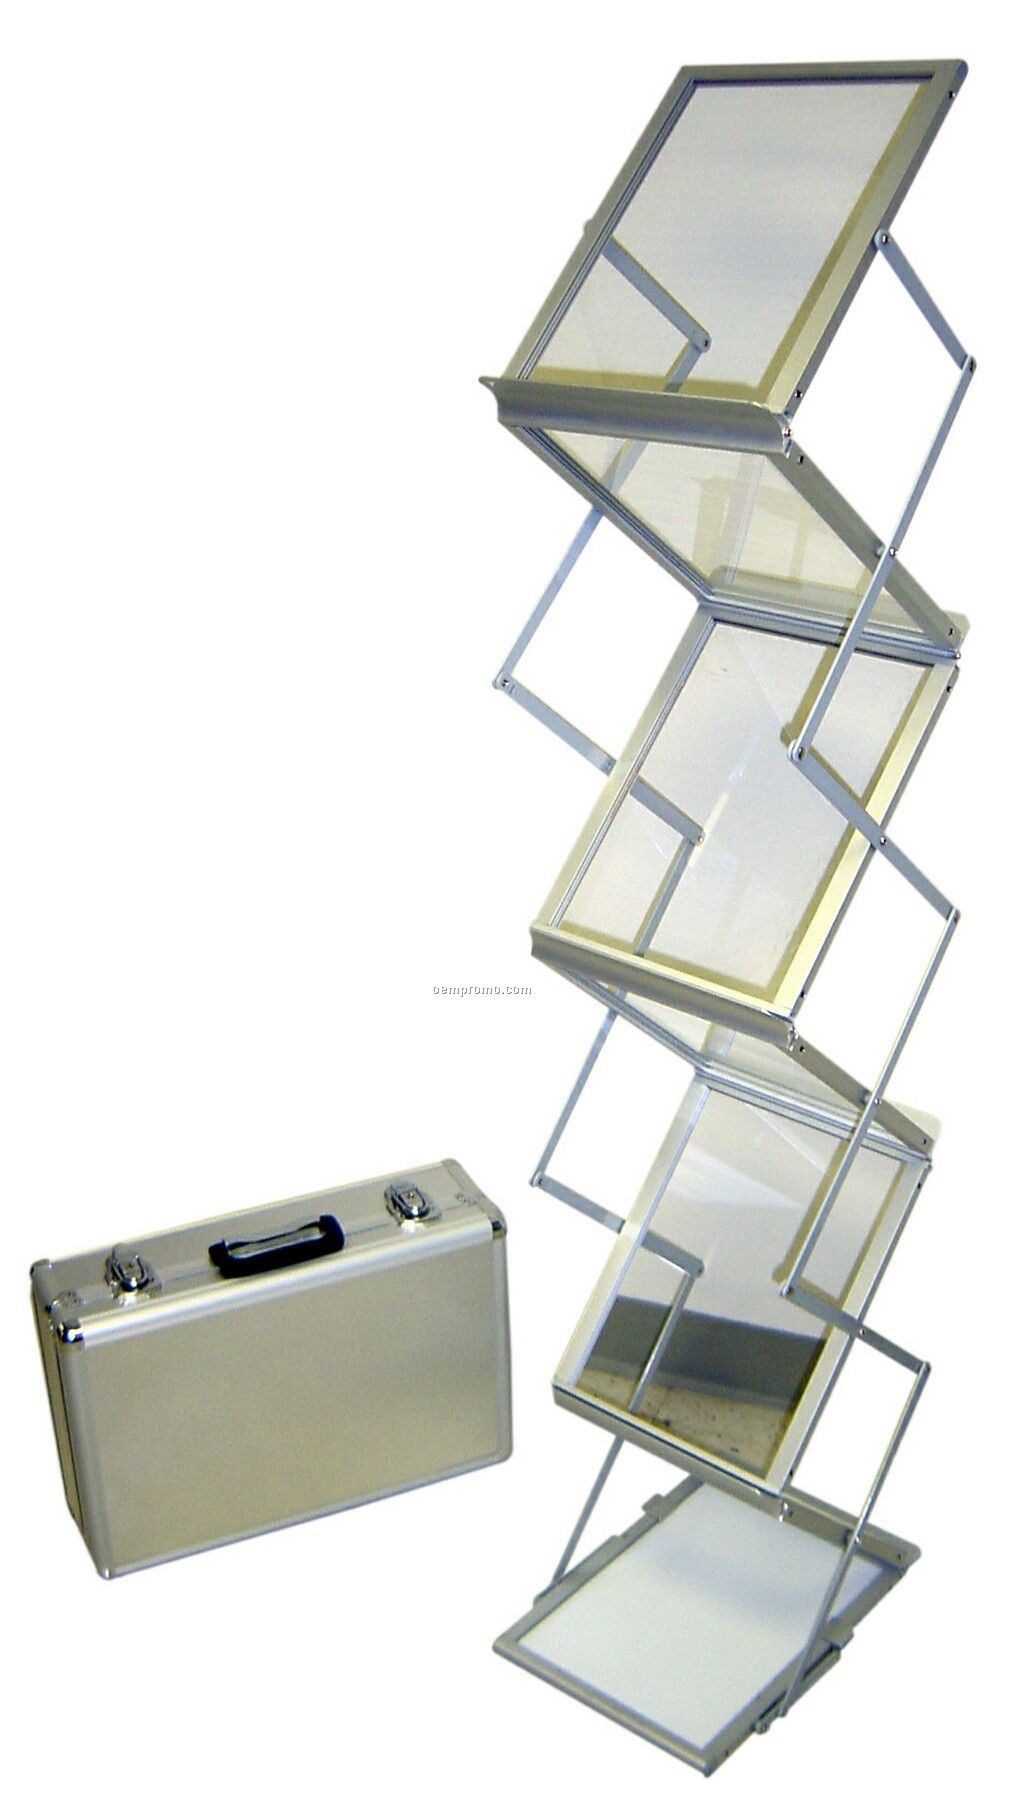 Double-sided Accordion Design Literature Holder